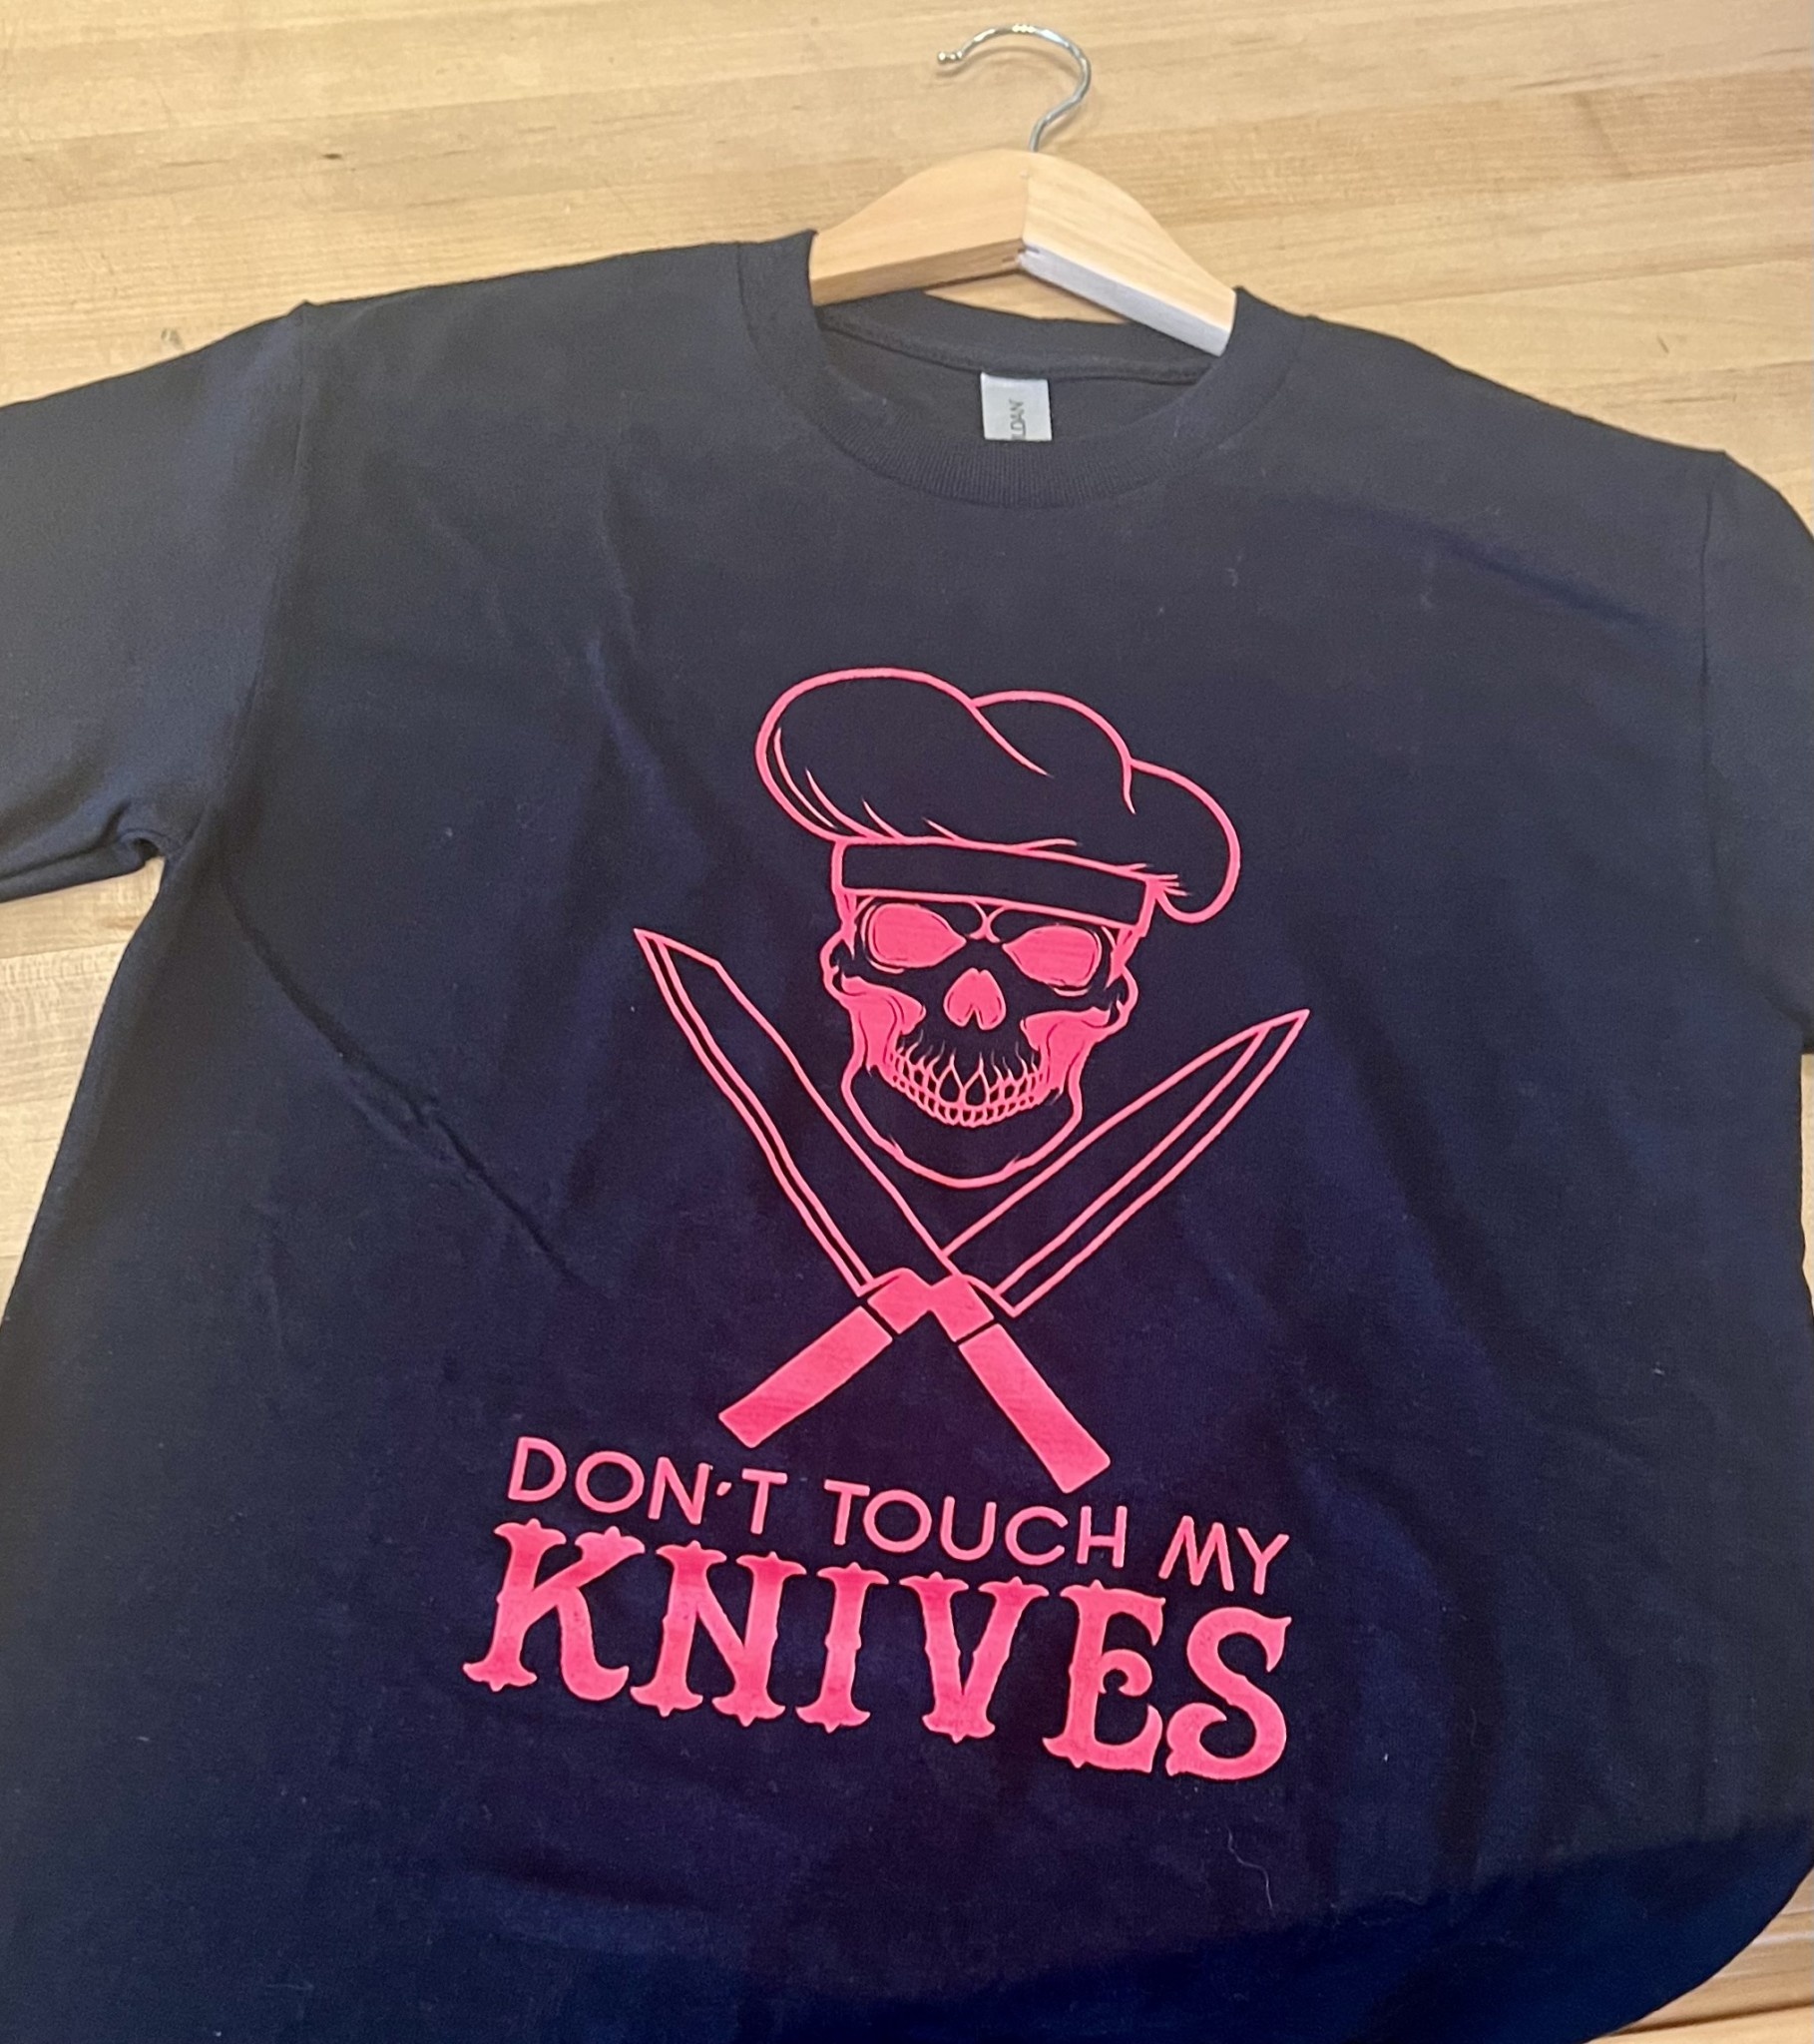 Dont touch my knves shirt XL